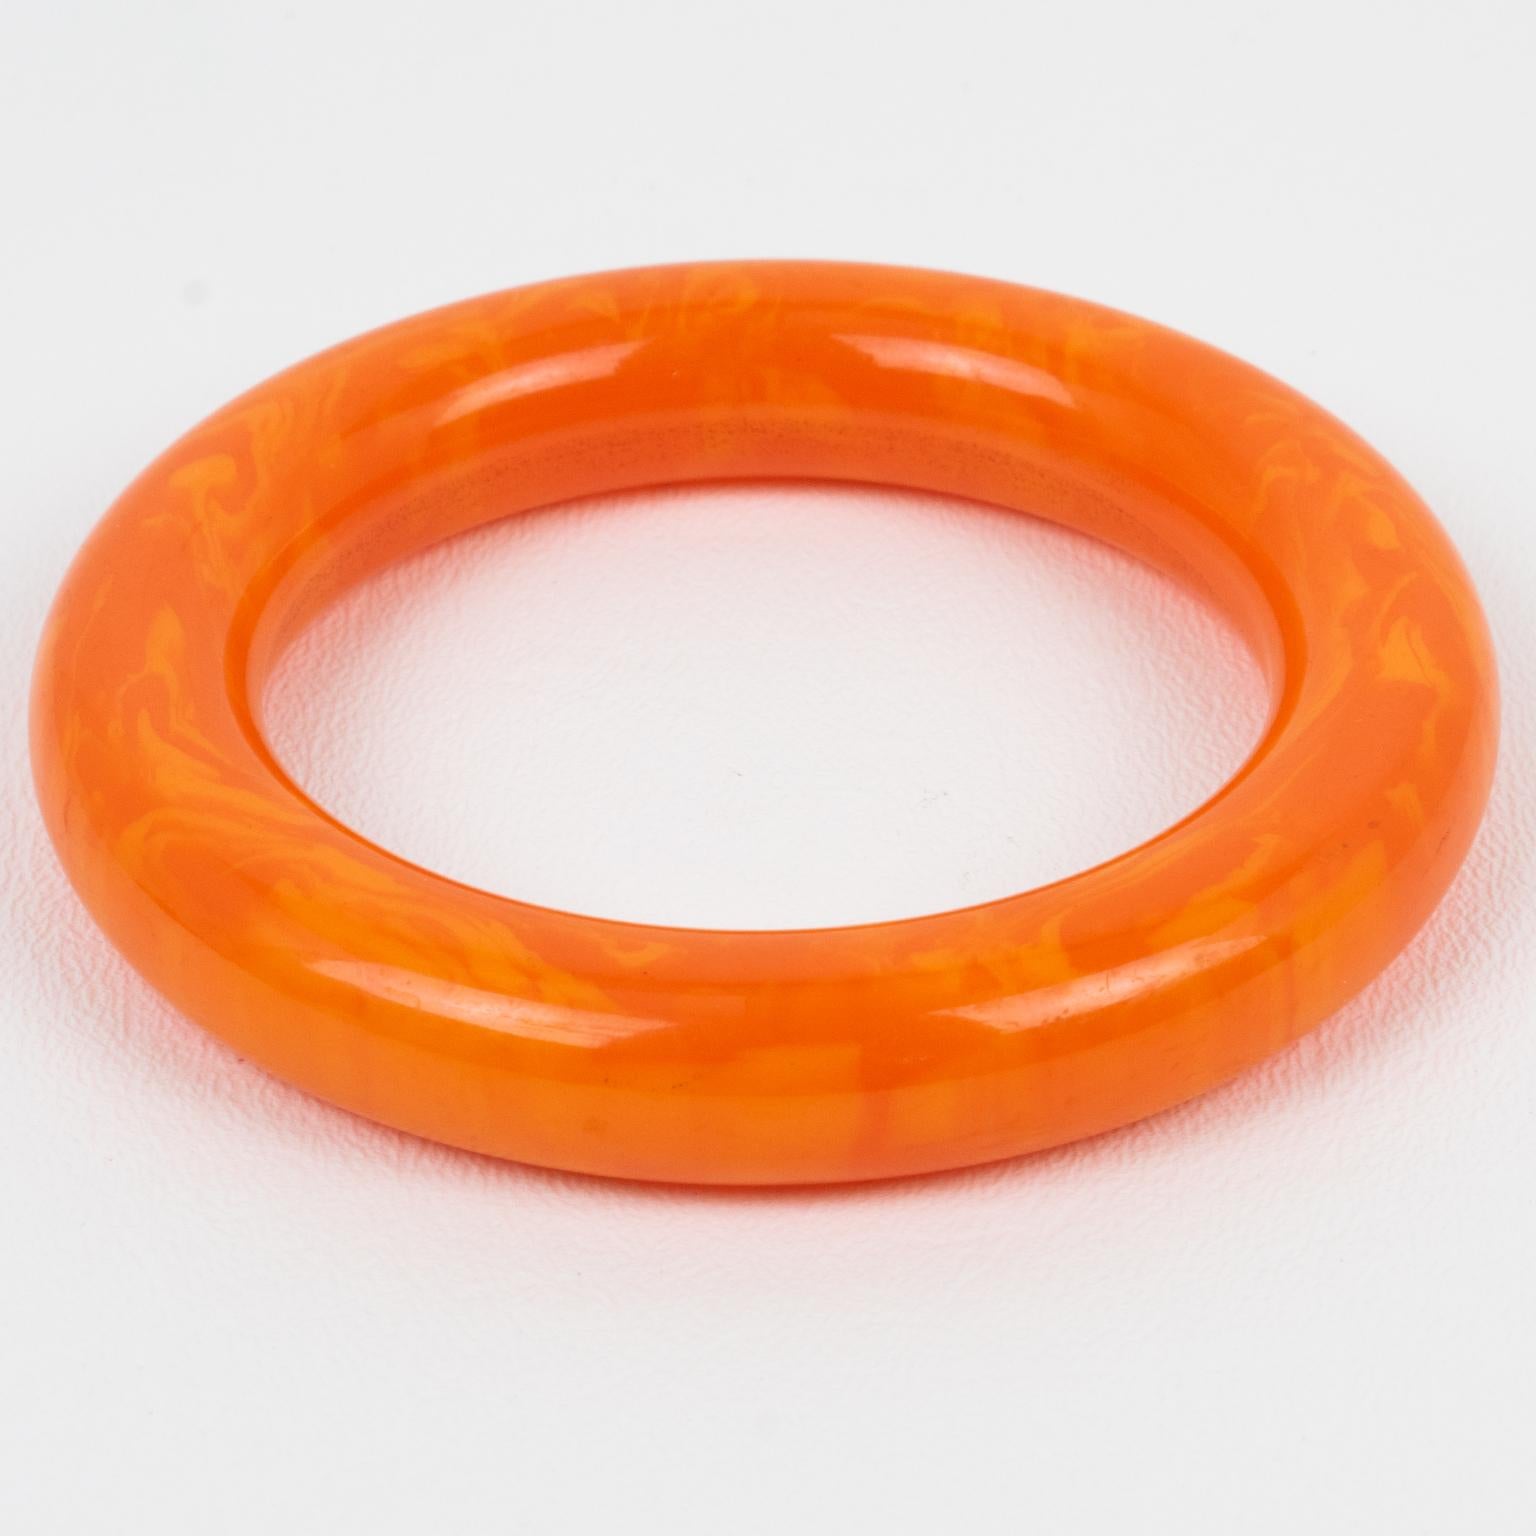 This lovely Bakelite bangle features a chunky tube shape with an intense tangerine orange color and cloudy cantaloupe swirling.
Measurements: Inside across is 2.50 in diameter (6.3 cm) - outside across is 3.63 in diameter (9.2 cm) - width is 0.63 in